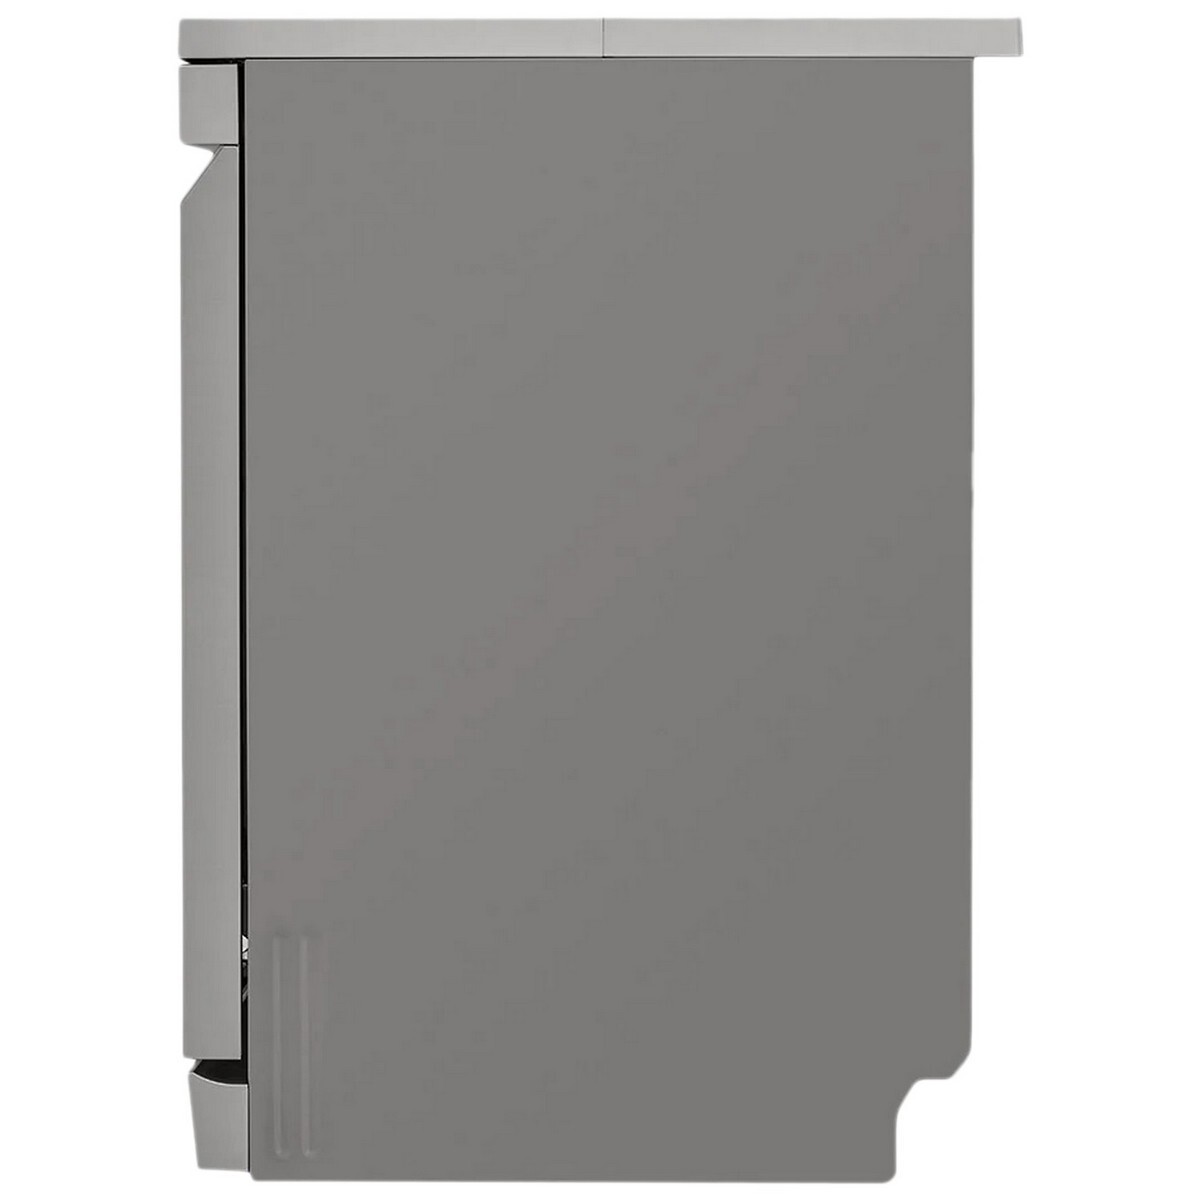 LG Direct Drive Technology Dish Washer DFB532FP,Silver